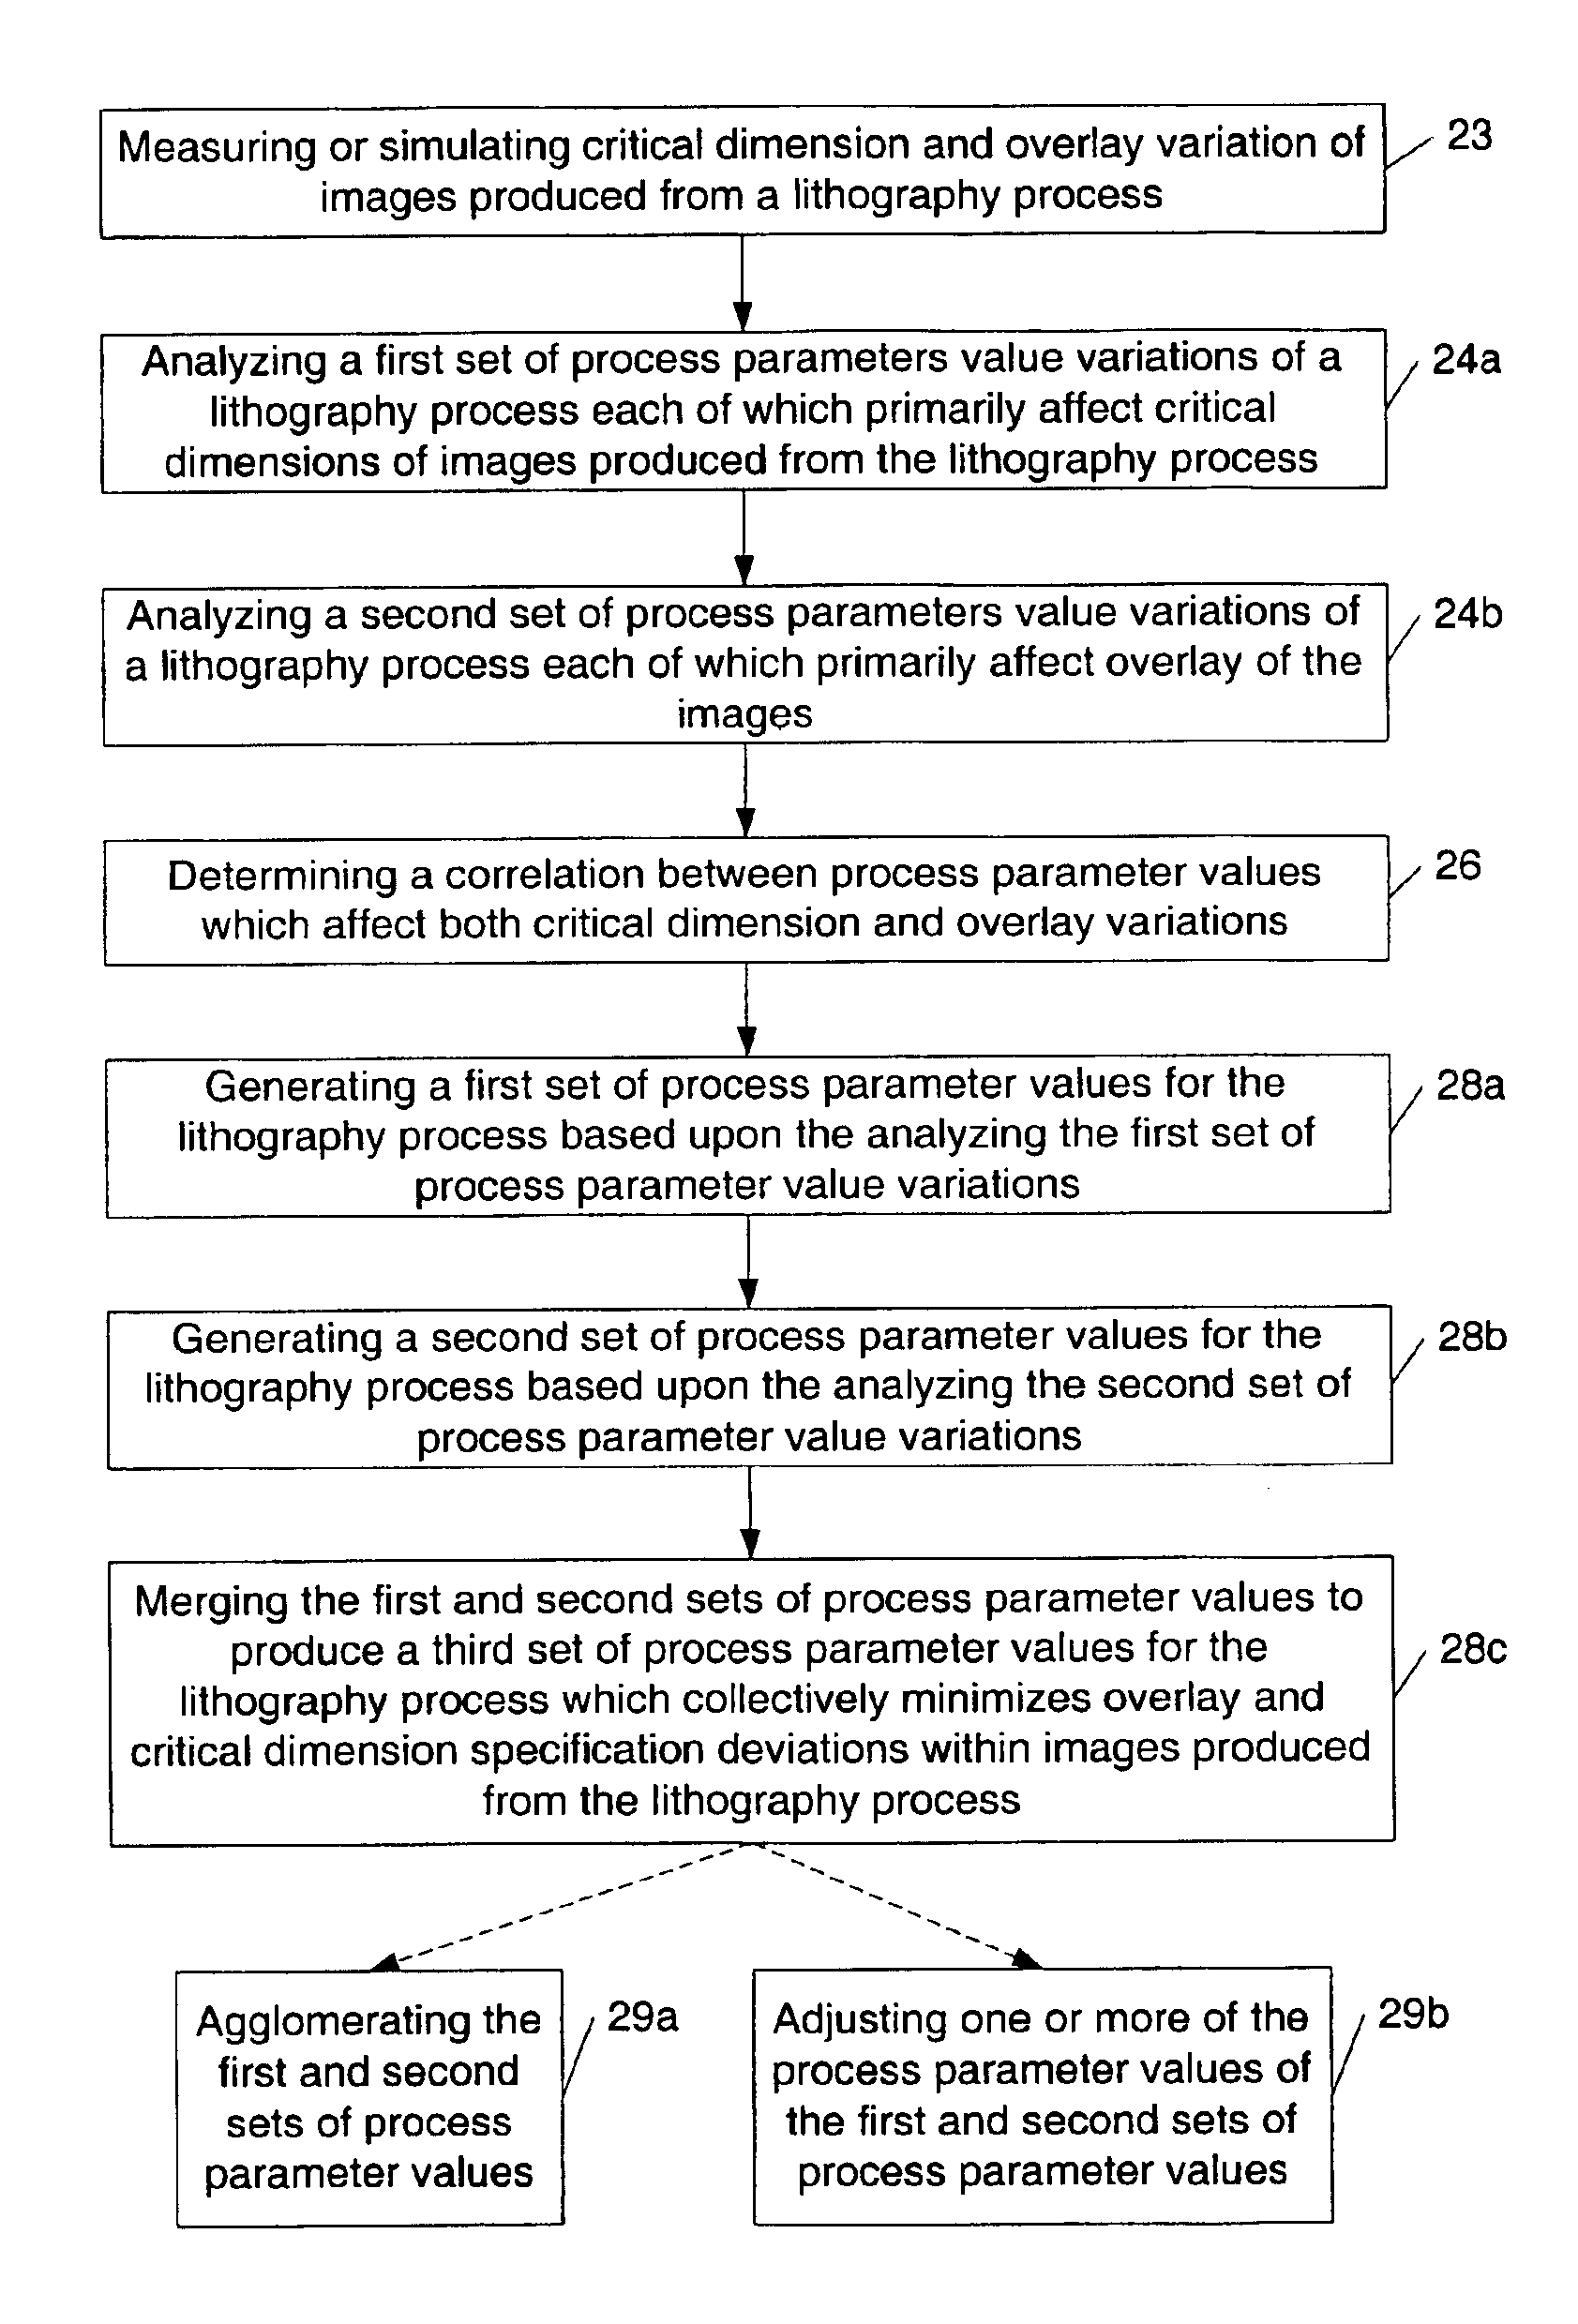 Computer-implemented method and carrier medium configured to generate a set of process parameters for a lithography process